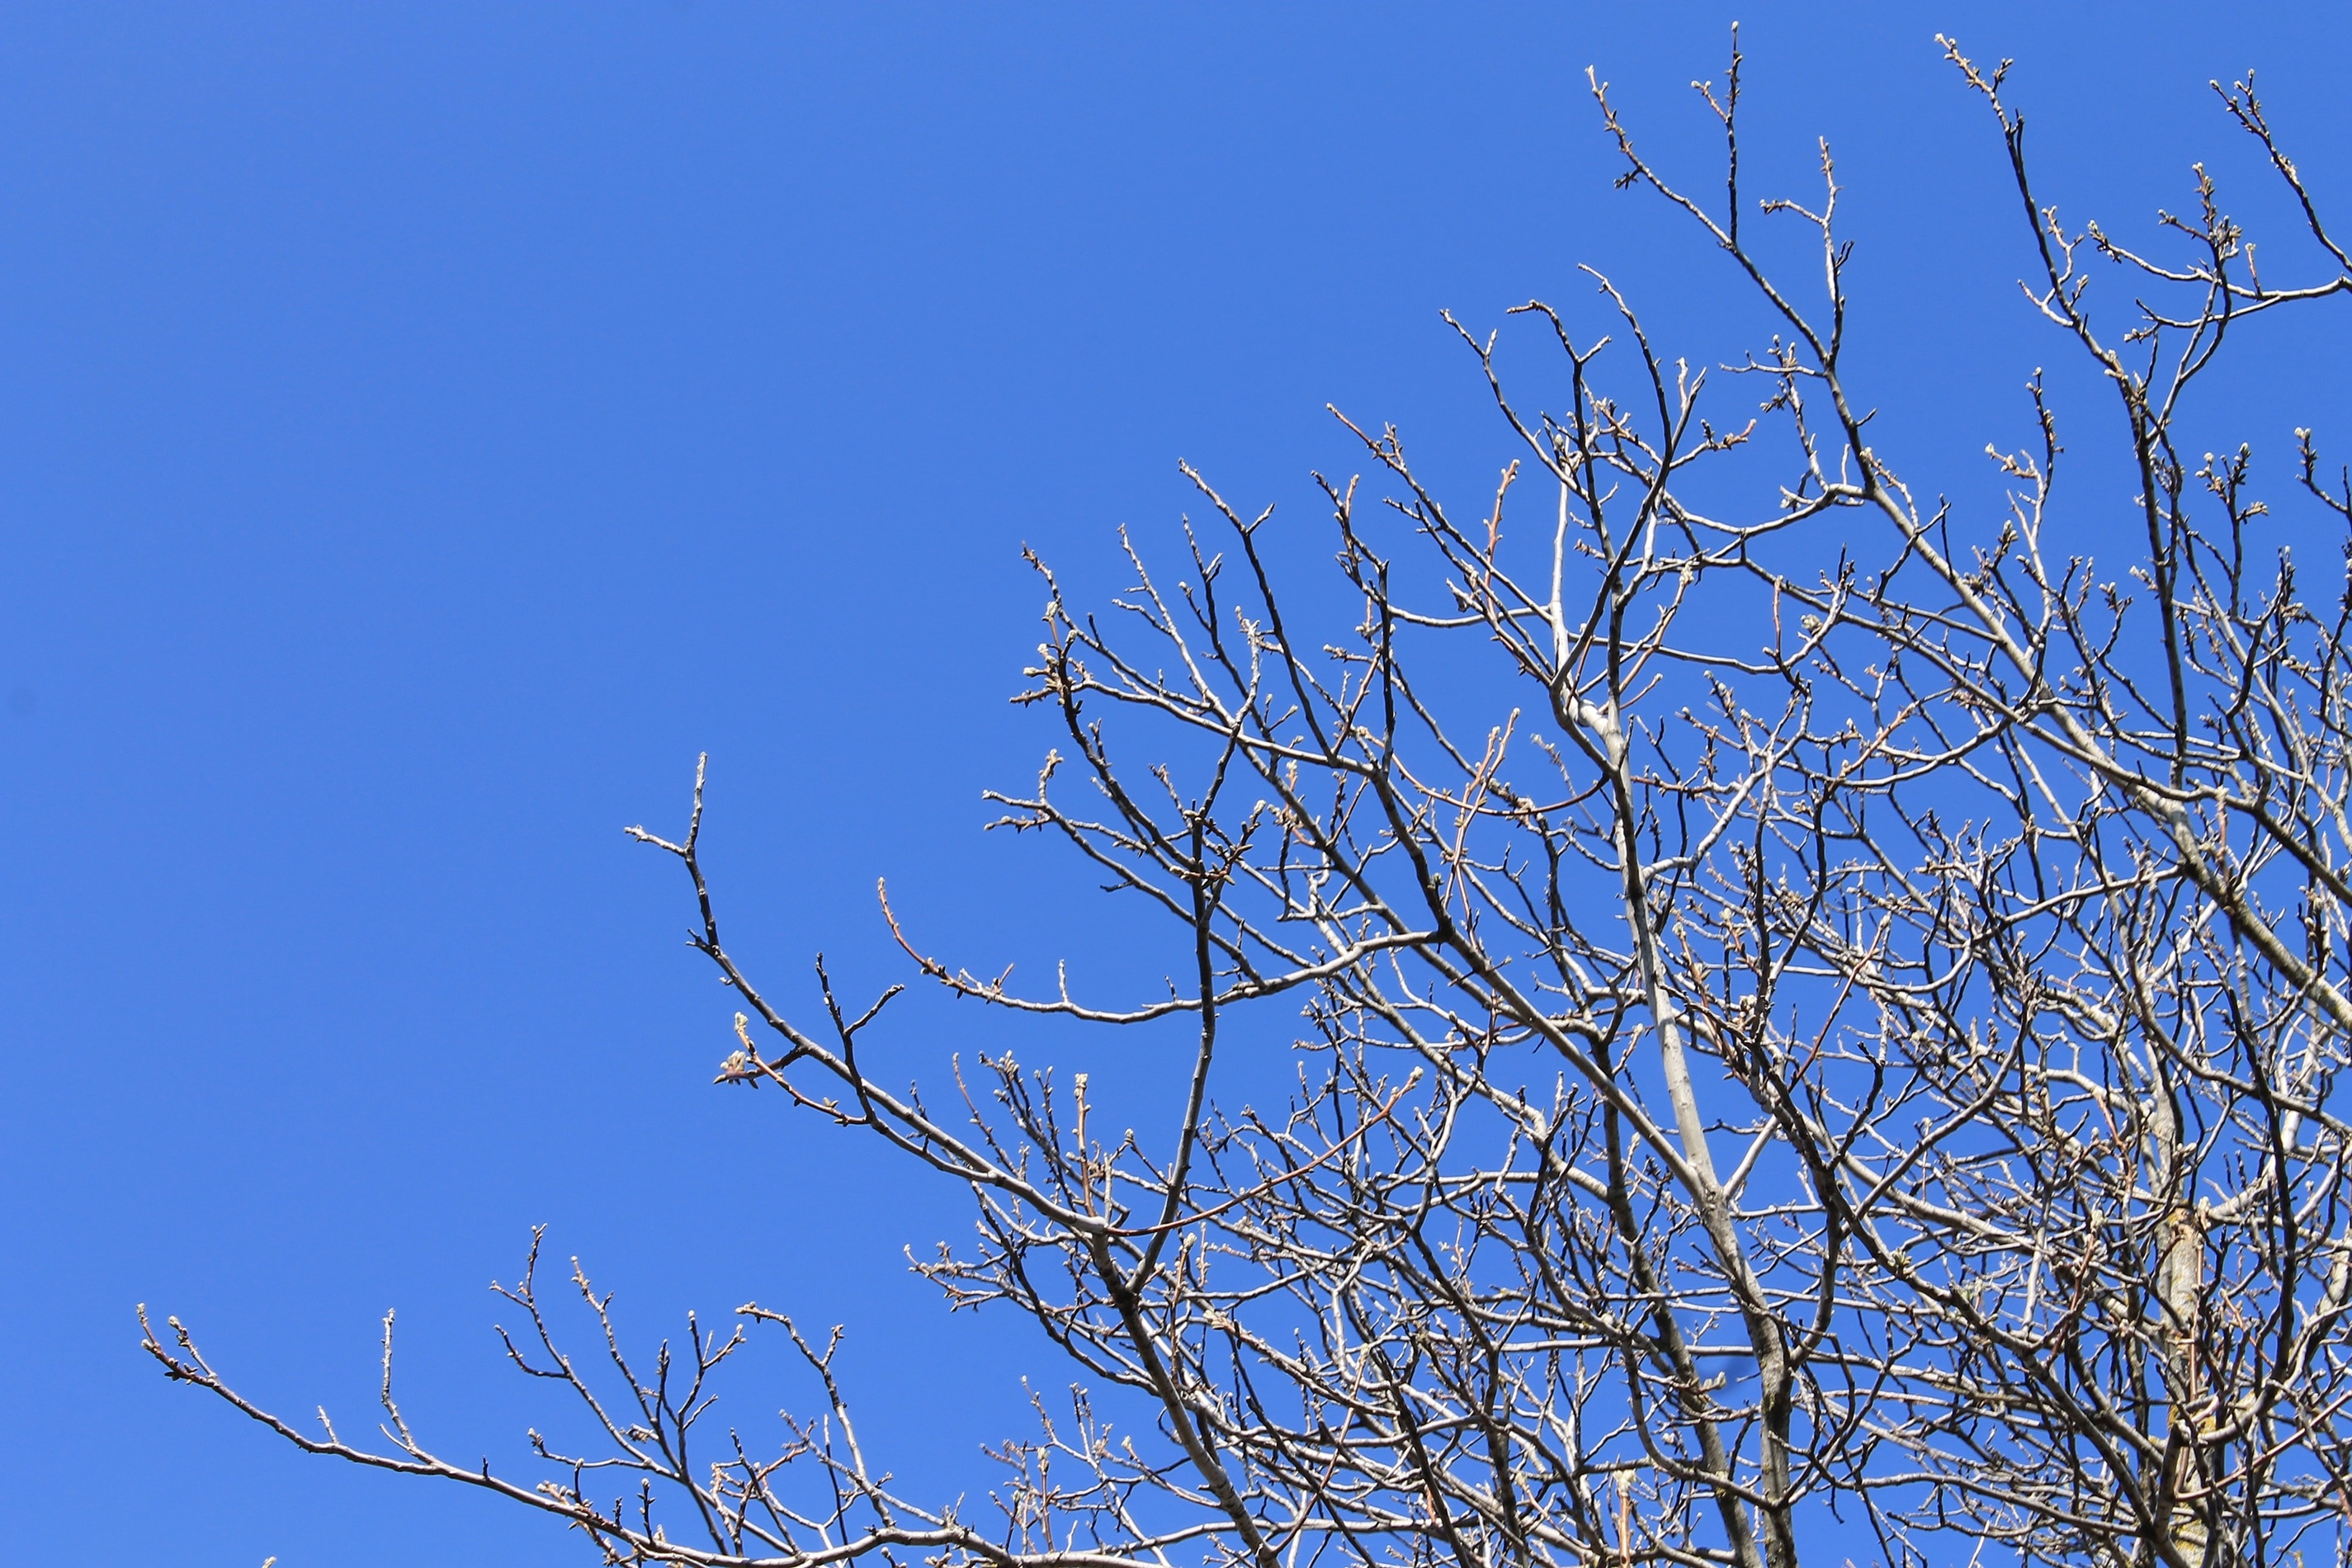 Sky, Blue, Trees, Background, Branches, bare tree, blue